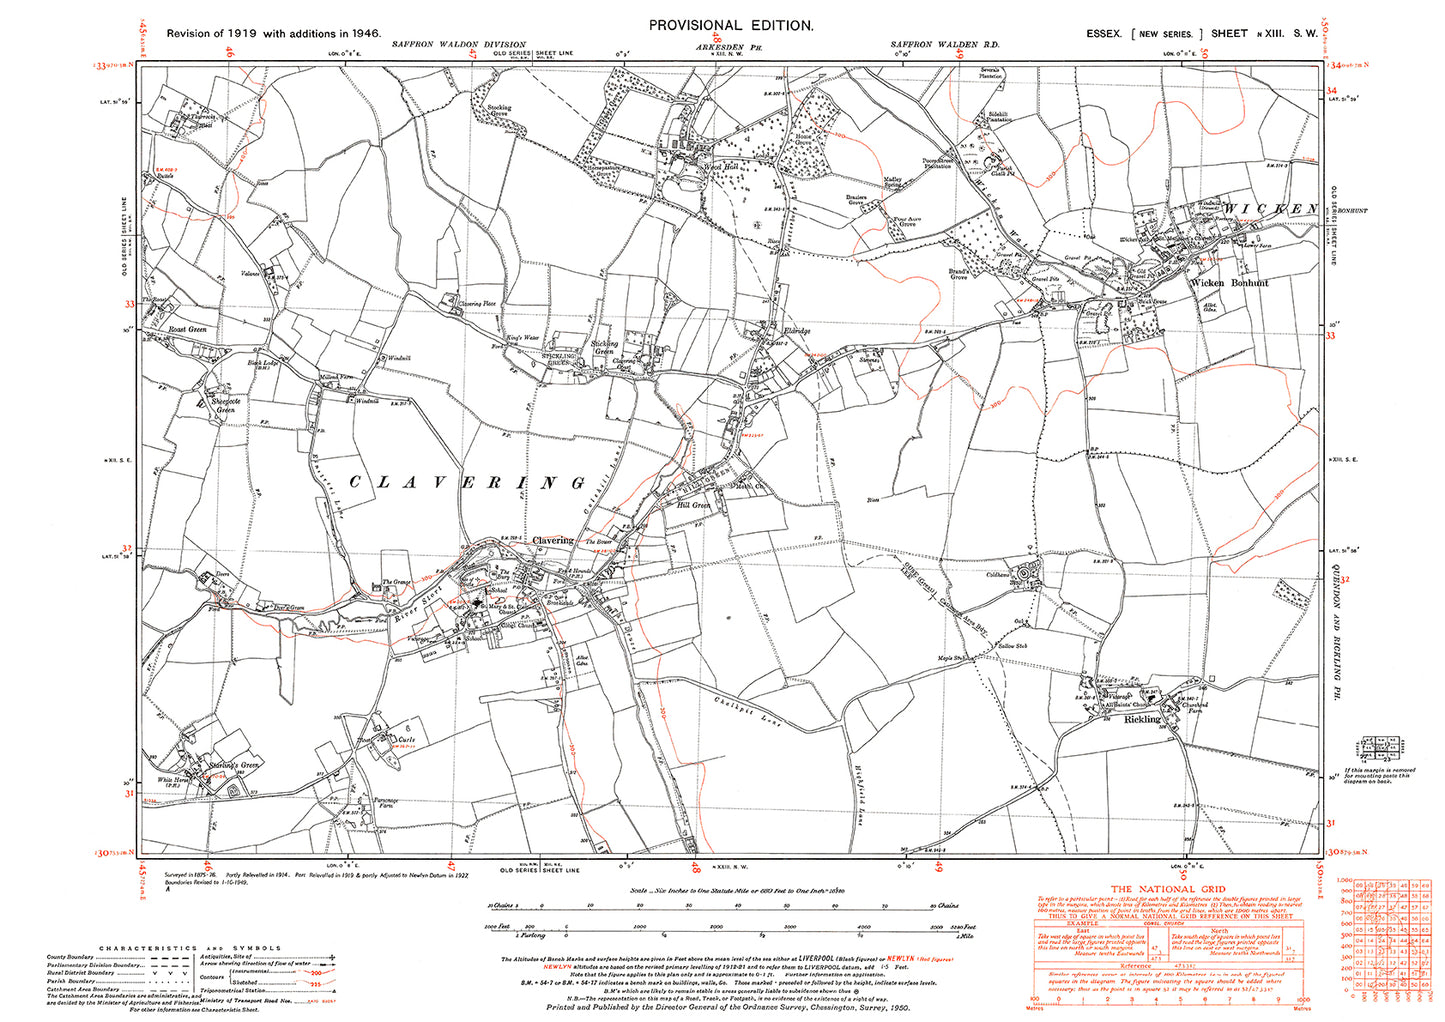 Old OS map dated 1946, showing Clavering, Wicken Bonhunt, Rickling and Stickling Green in Essex - 13SW